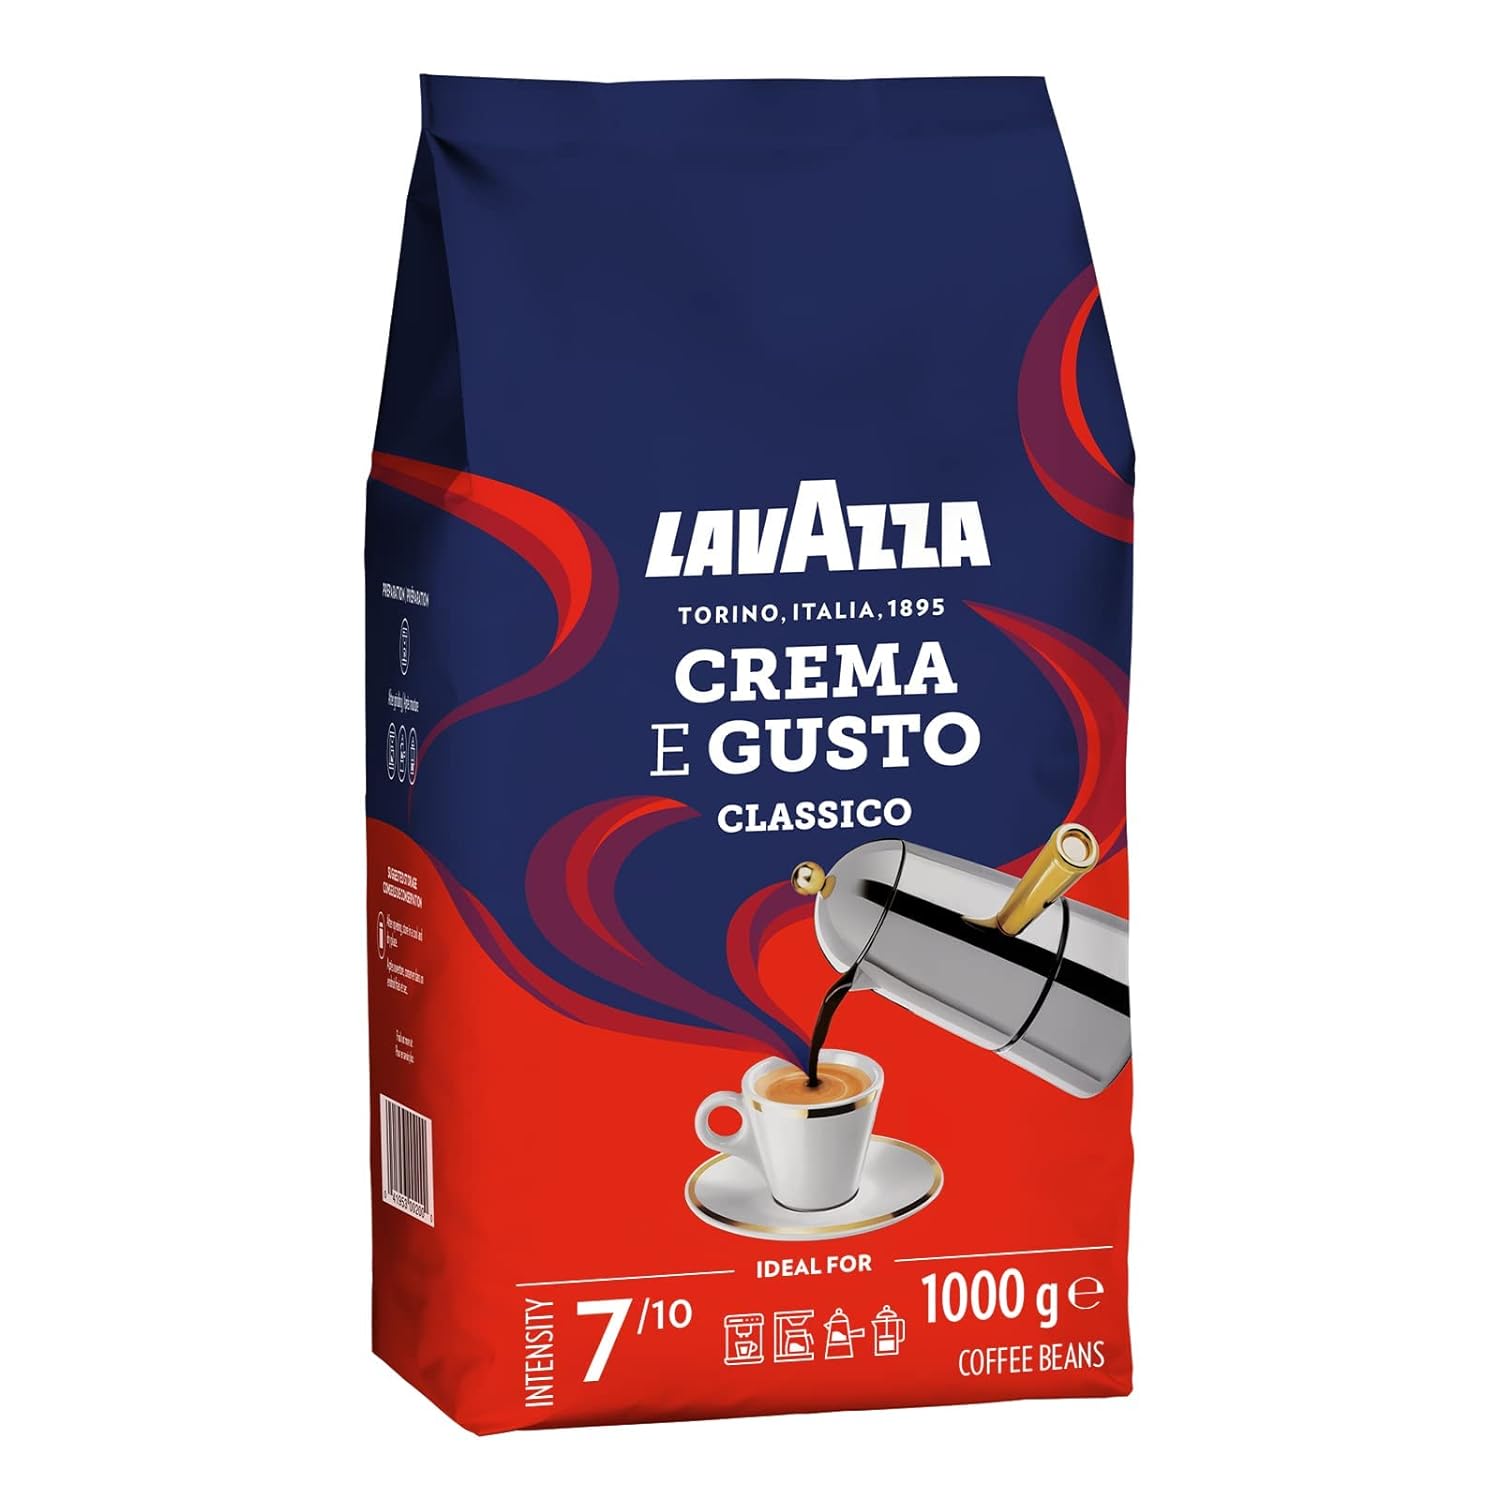 Lavazza, Crema e Gusto Classico, roasted coffee beans, with spicy aromanops, ideal for espresso, arabica and robusta, intensity 8/10, dark roasting, 1 pack with 1 kg